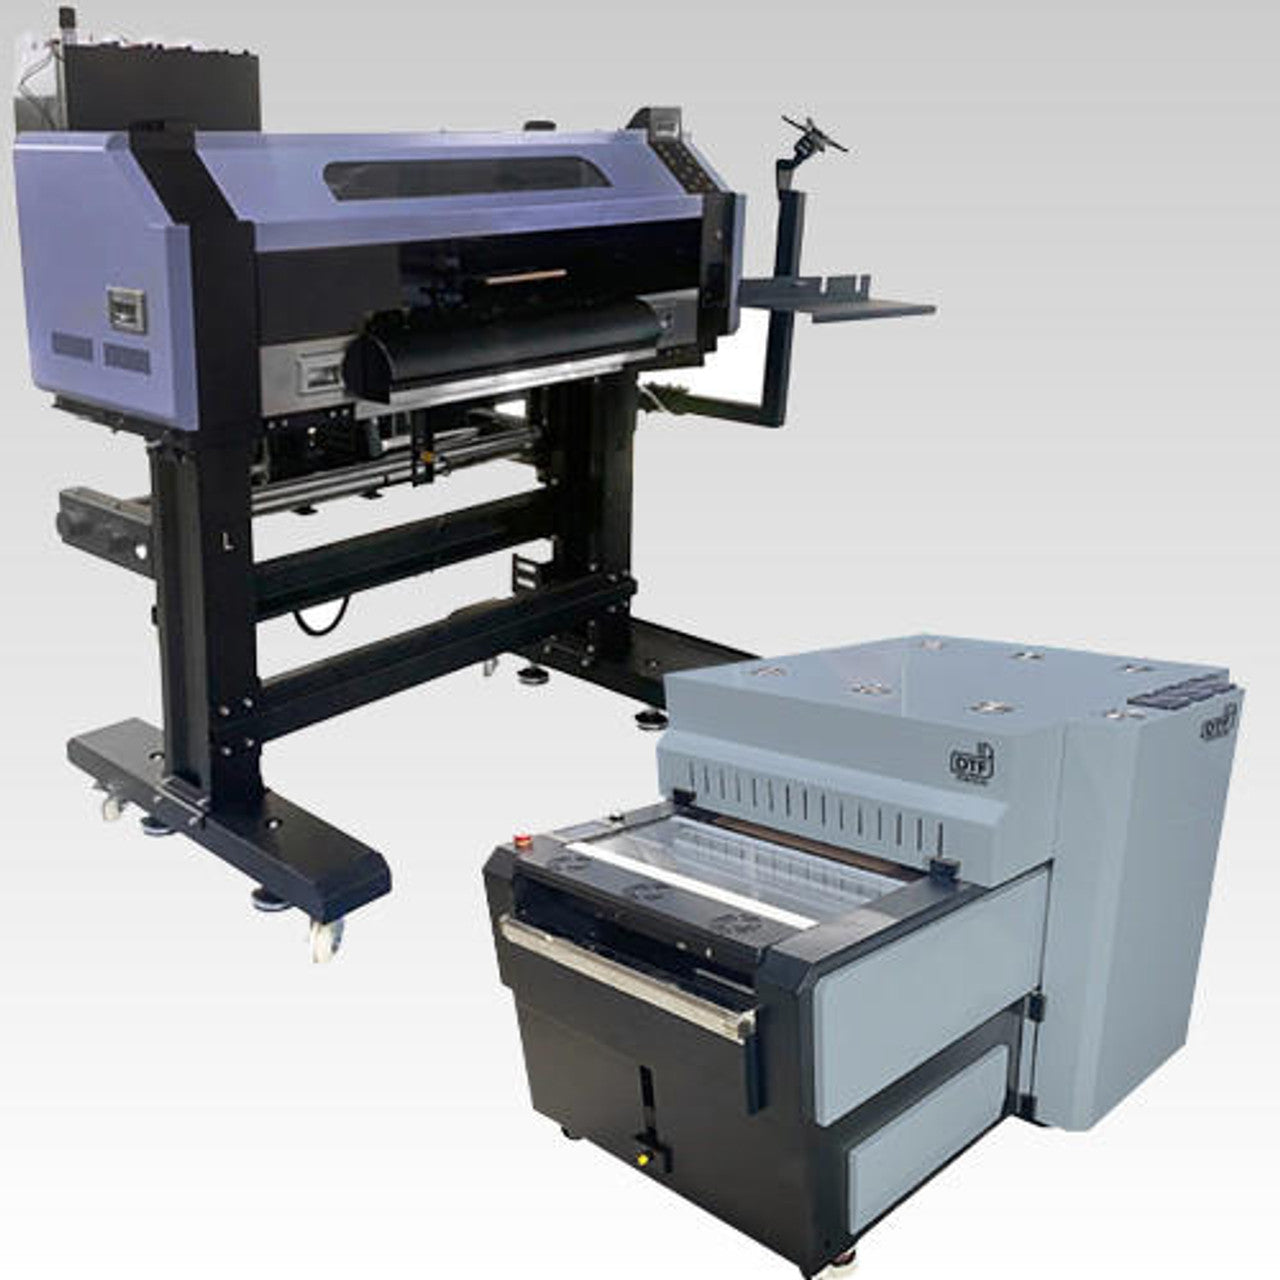 A4 Printer with Curing Oven and Shaker Bundle